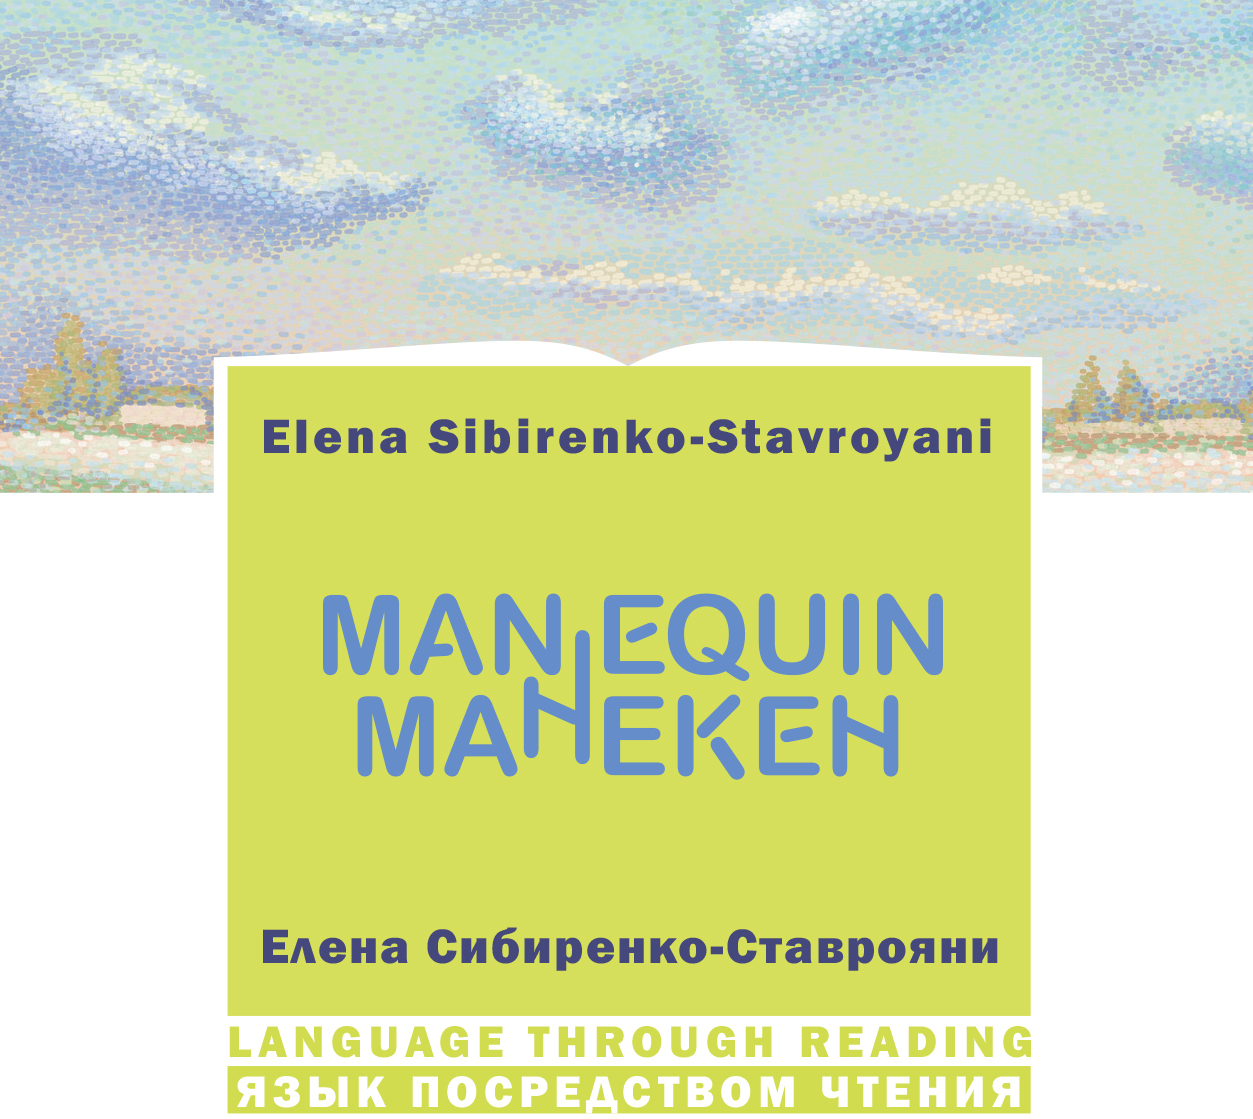 Stanitsa Publishers presents a new bilingual book Mannequin